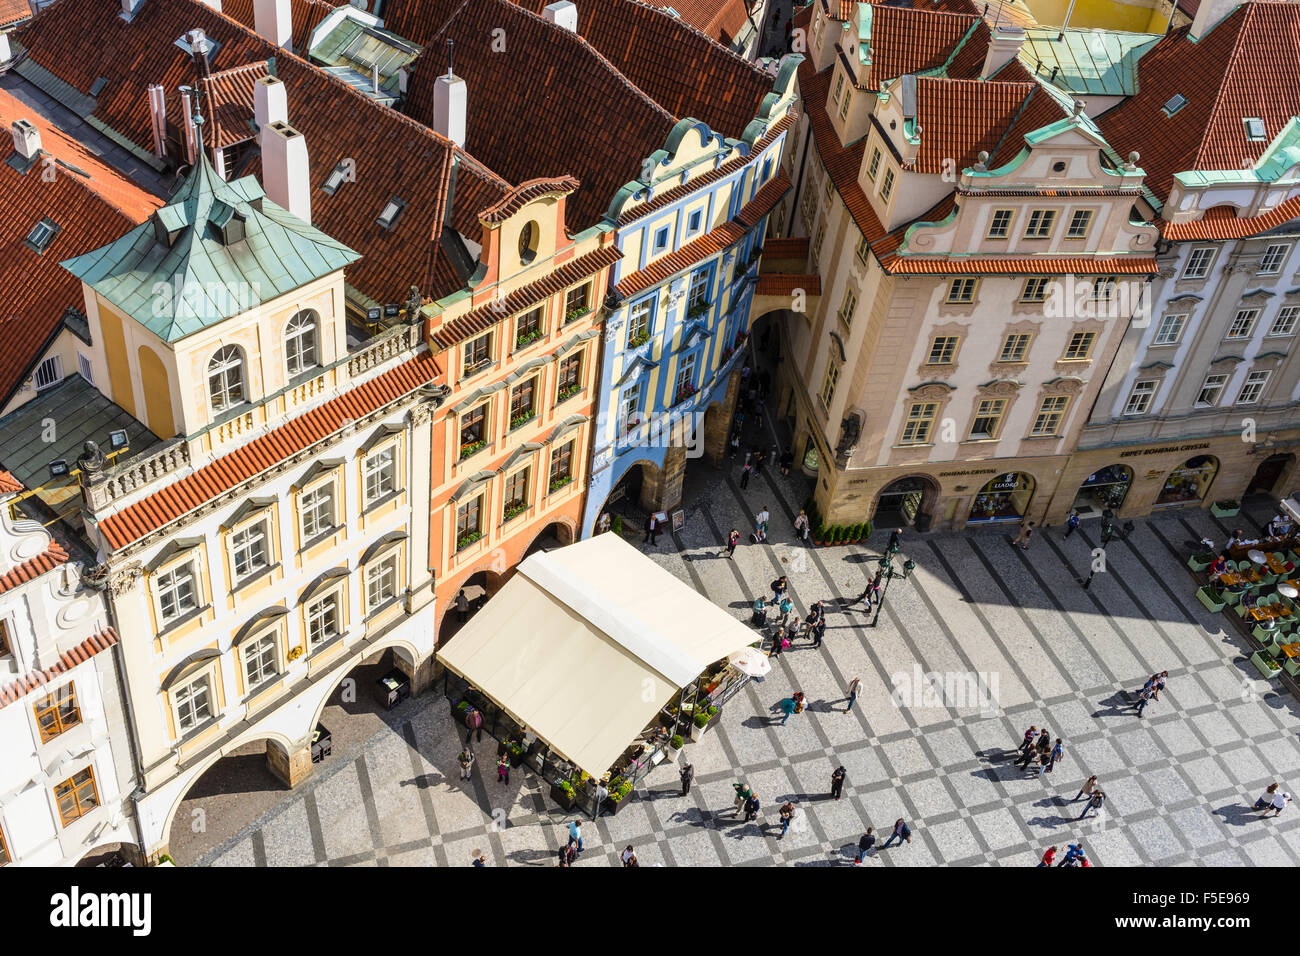 High angle view of buildings in Old Town Square, UNESCO World Heritage Site, Prague, Czech Republic, Europe Stock Photo